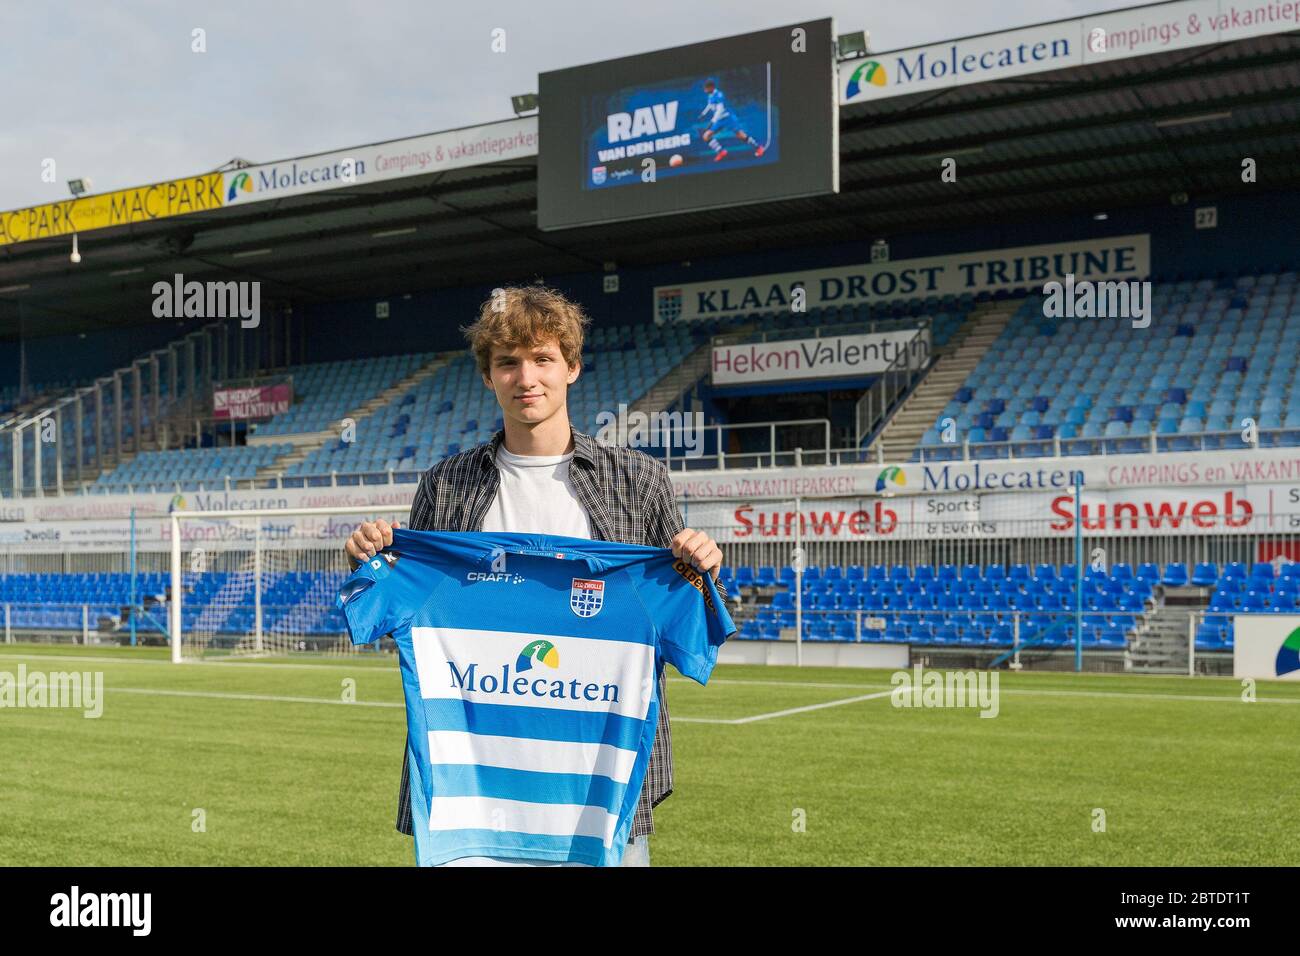 25 may 2022 Zwolle, Netherlands Rav van den Berg of PEC Zwolle pose with PEC Zwolle shirt after signing a contract until middle of 2022 on may 25 in Zwolle Stock Photo